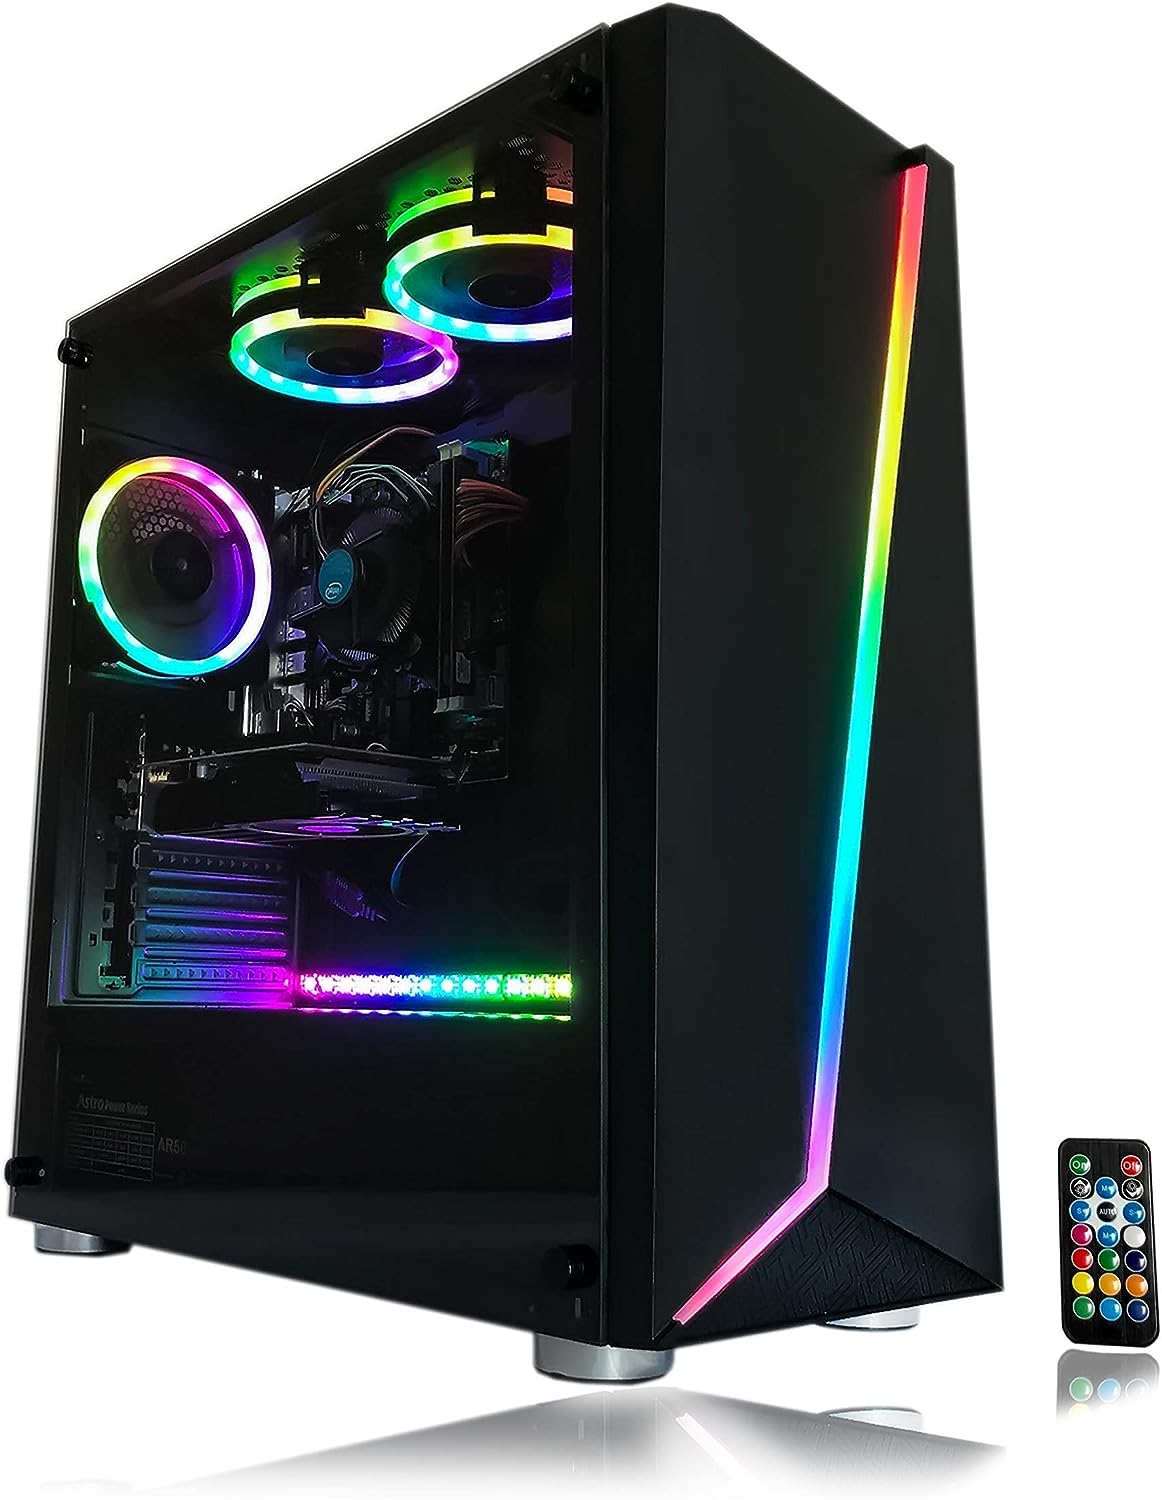 Top 9 Best Gaming PC Under $500 for Unmatched Performance